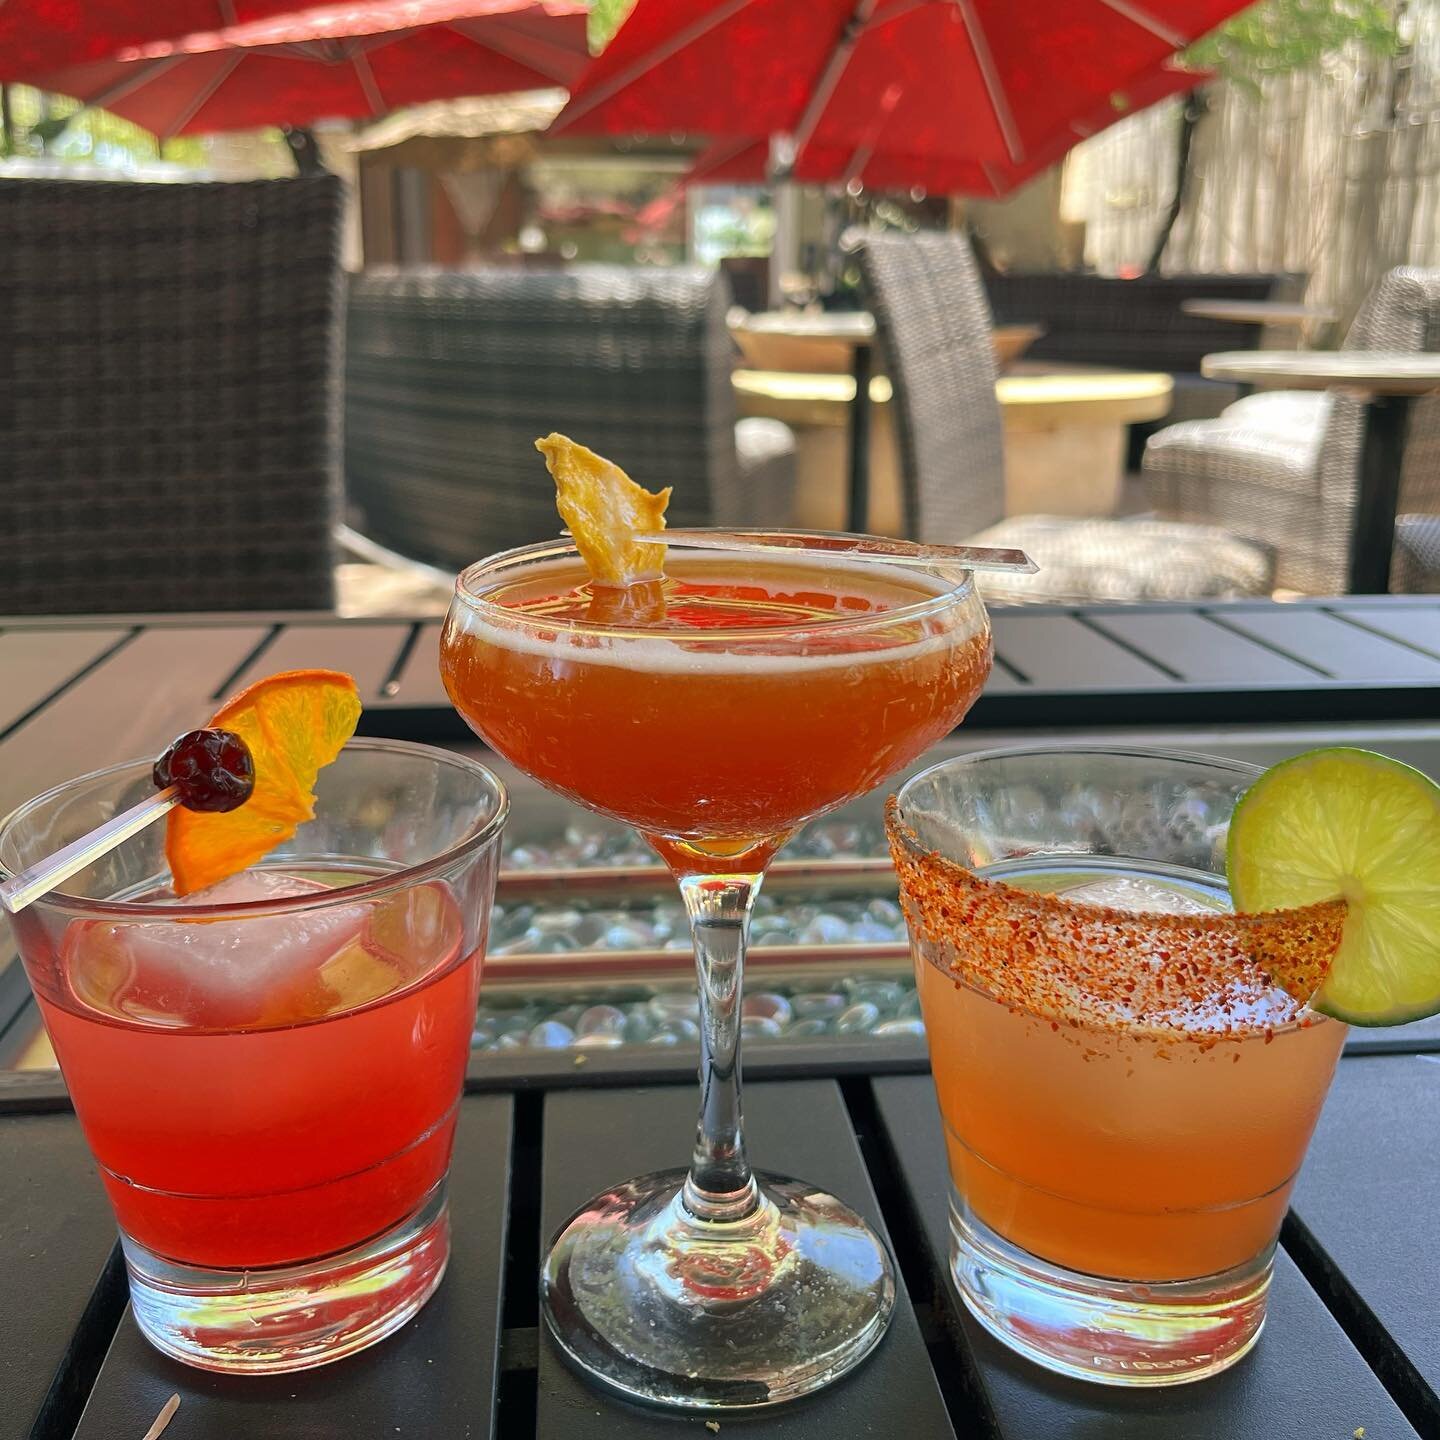 🚨 NEW SUMMER COCKTAILS! 🚨 Come cool down during Happy Hour with three new cocktails &mdash; featuring mezcal, vodka, and dark rum!! 
.
.
.
.
#timowinebar #azrestaurants #phoenix #cocktails #summer